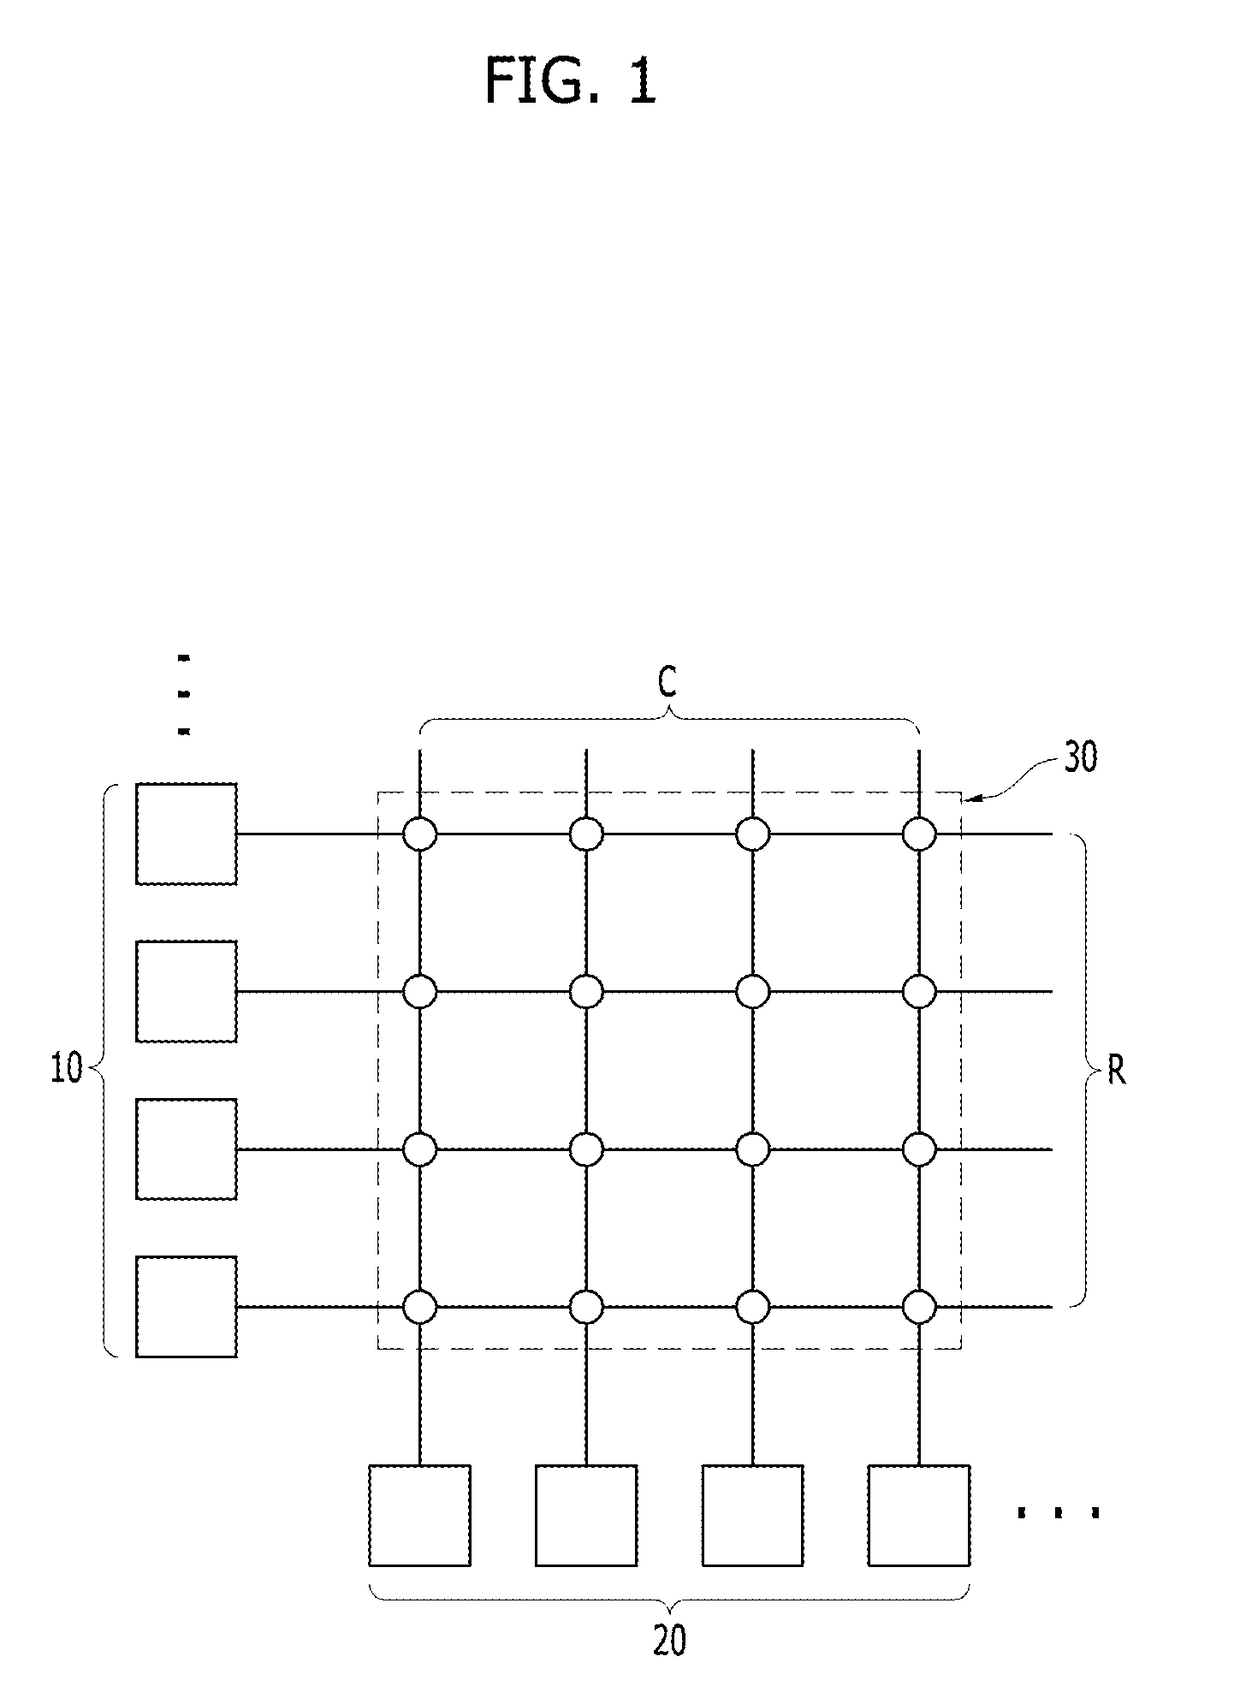 Neuromorphic device including post-synaptic neurons having a comparator for deciding quasi-learned synapses